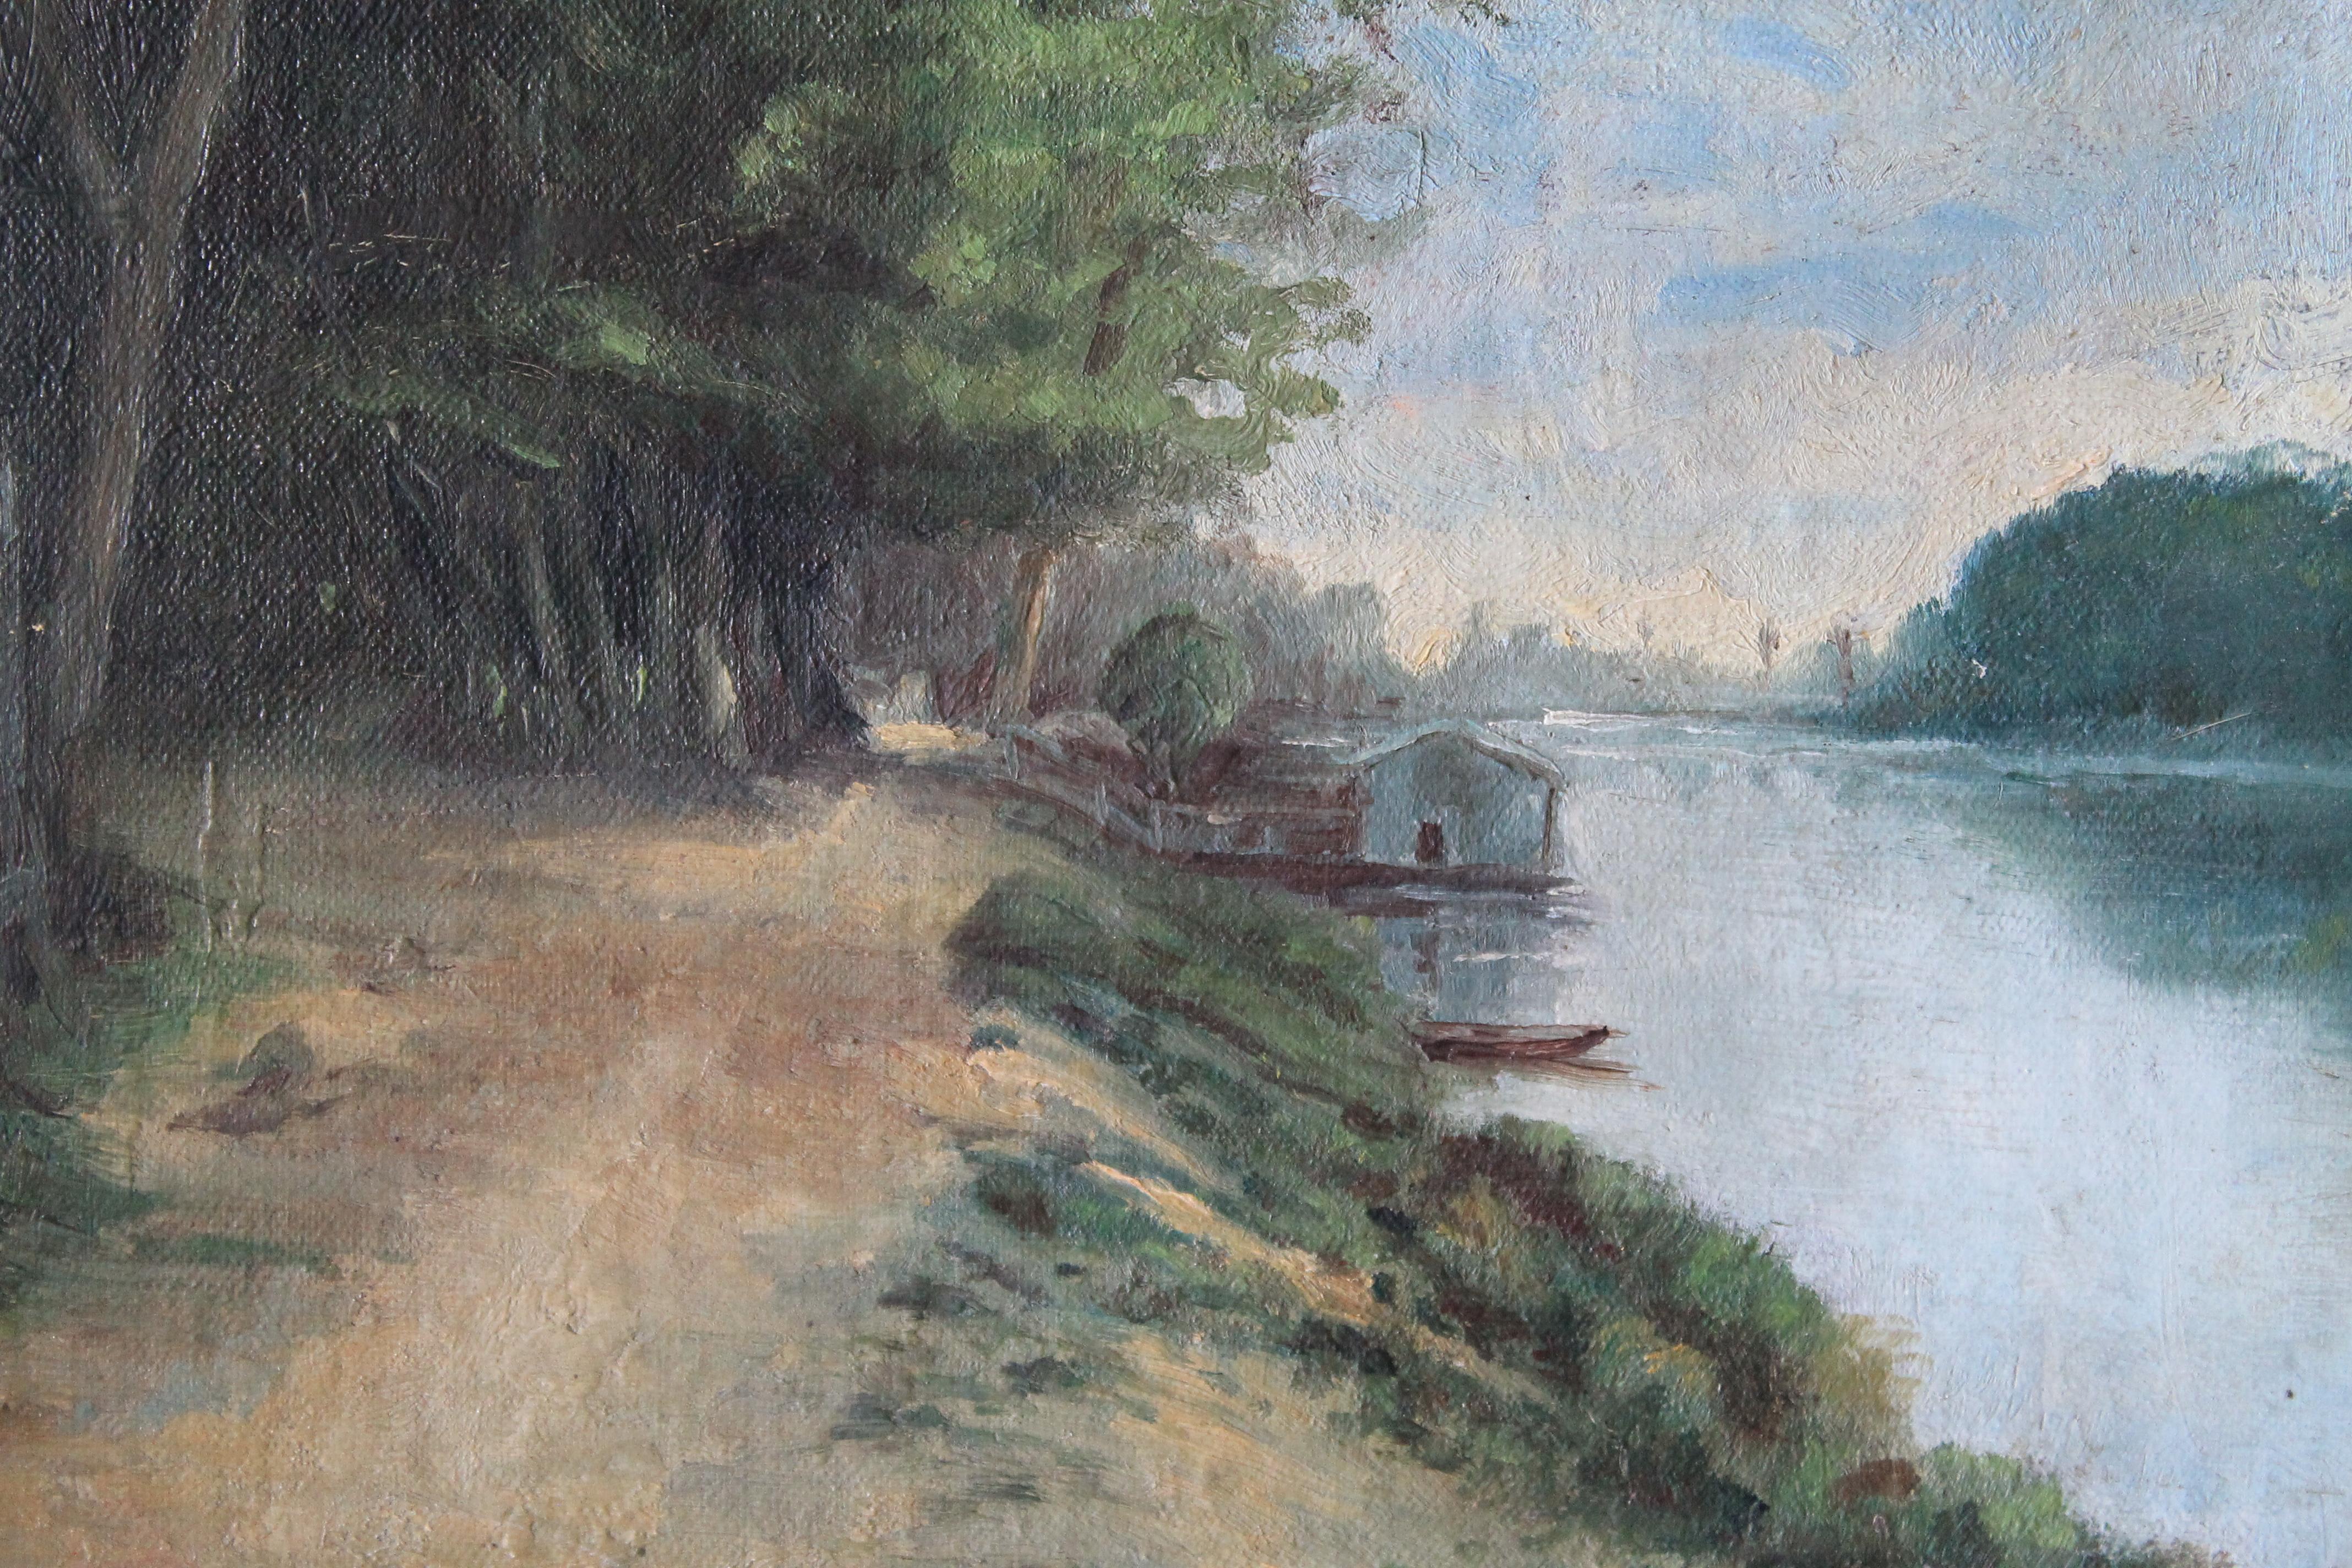 Late 1800's antique French riverscape/landscape oil painting.  This mellow and slightly moody old oil painting is on a canvas board.  Illuminated on the right by an open animated and stormy sky, reflected in the cool, calm waters of a river.  Your